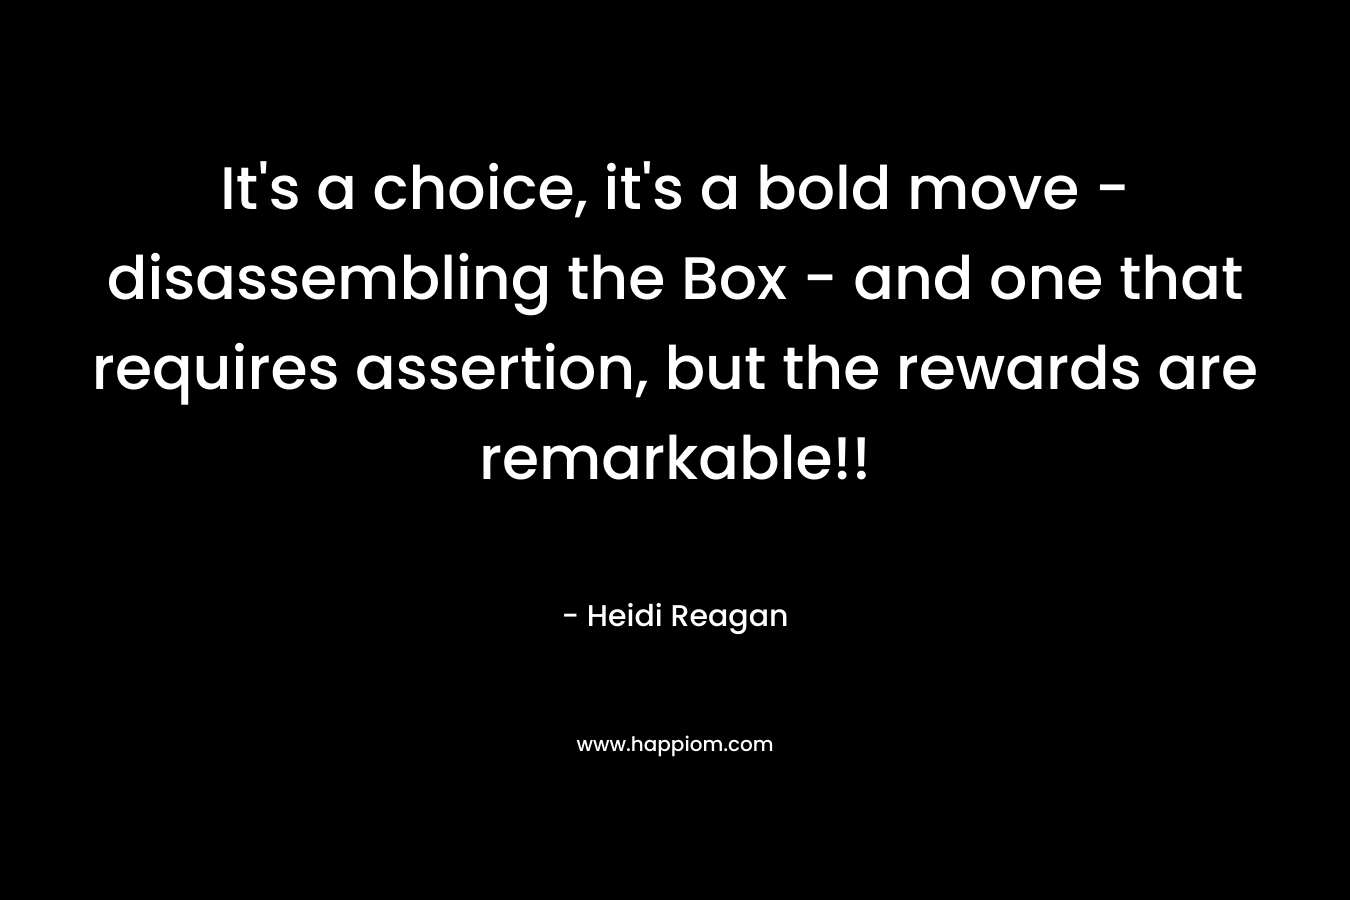 It's a choice, it's a bold move - disassembling the Box - and one that requires assertion, but the rewards are remarkable!!